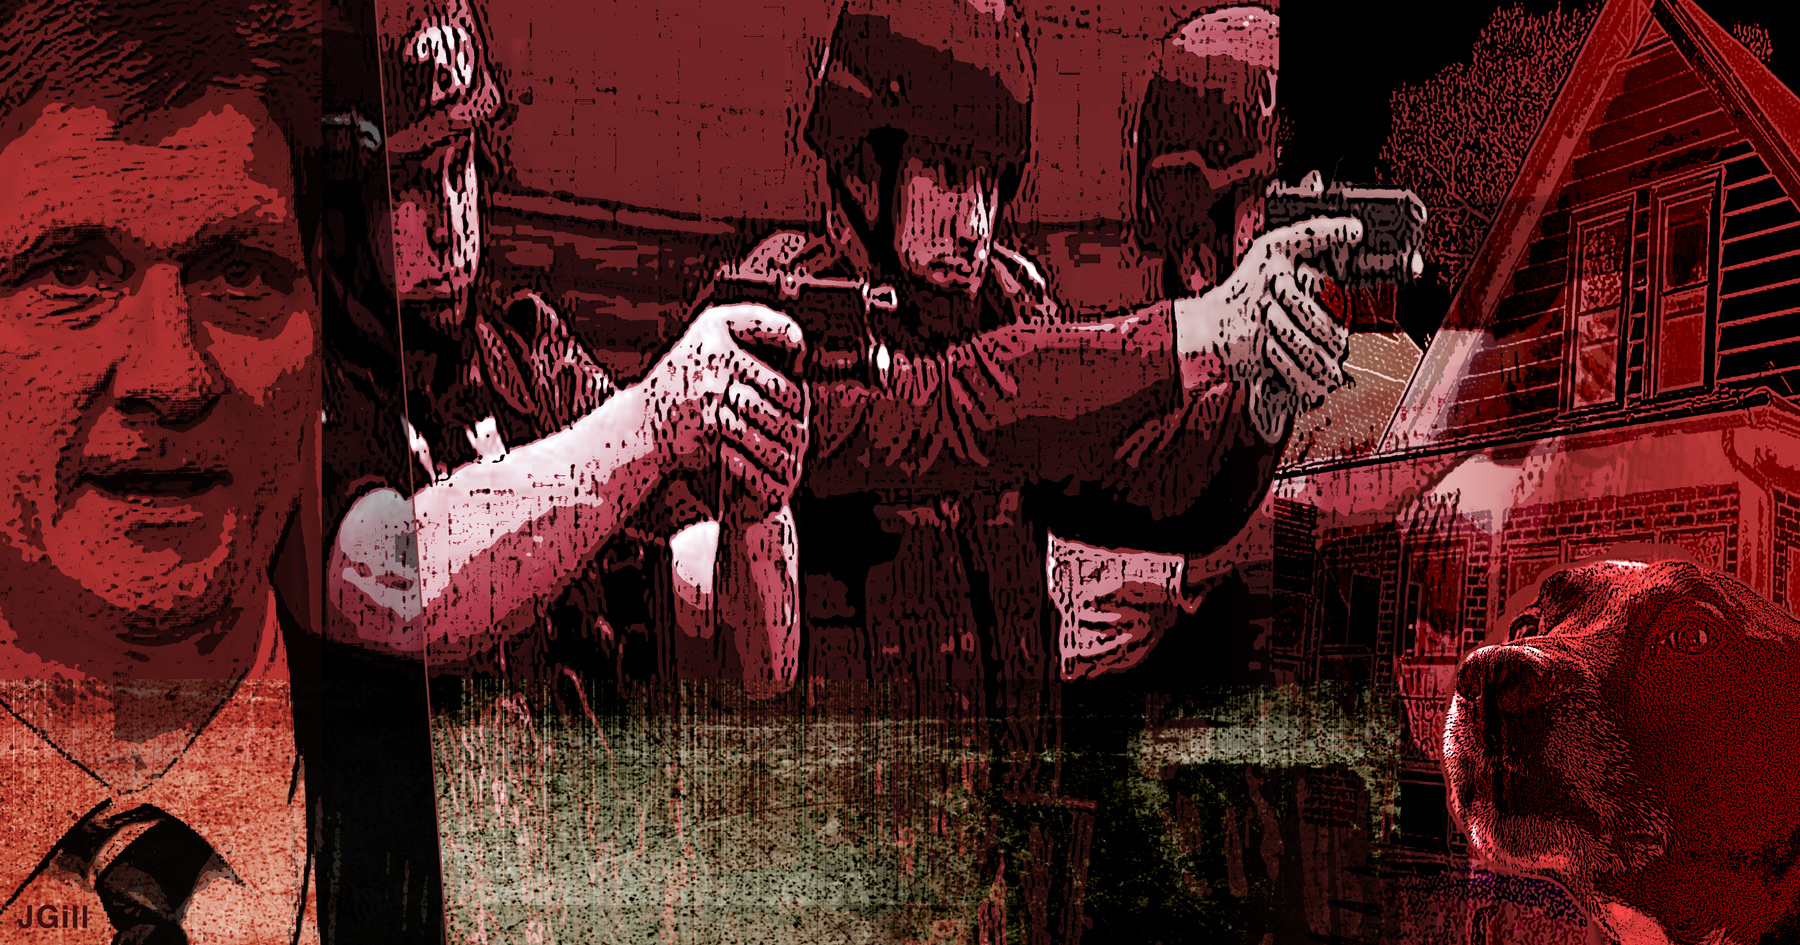 Assault on Free Speech in Wisconsin, police abuse, harassment, militarization, democracy, intimidation, collage, photomontage, illustration, editorial, violence